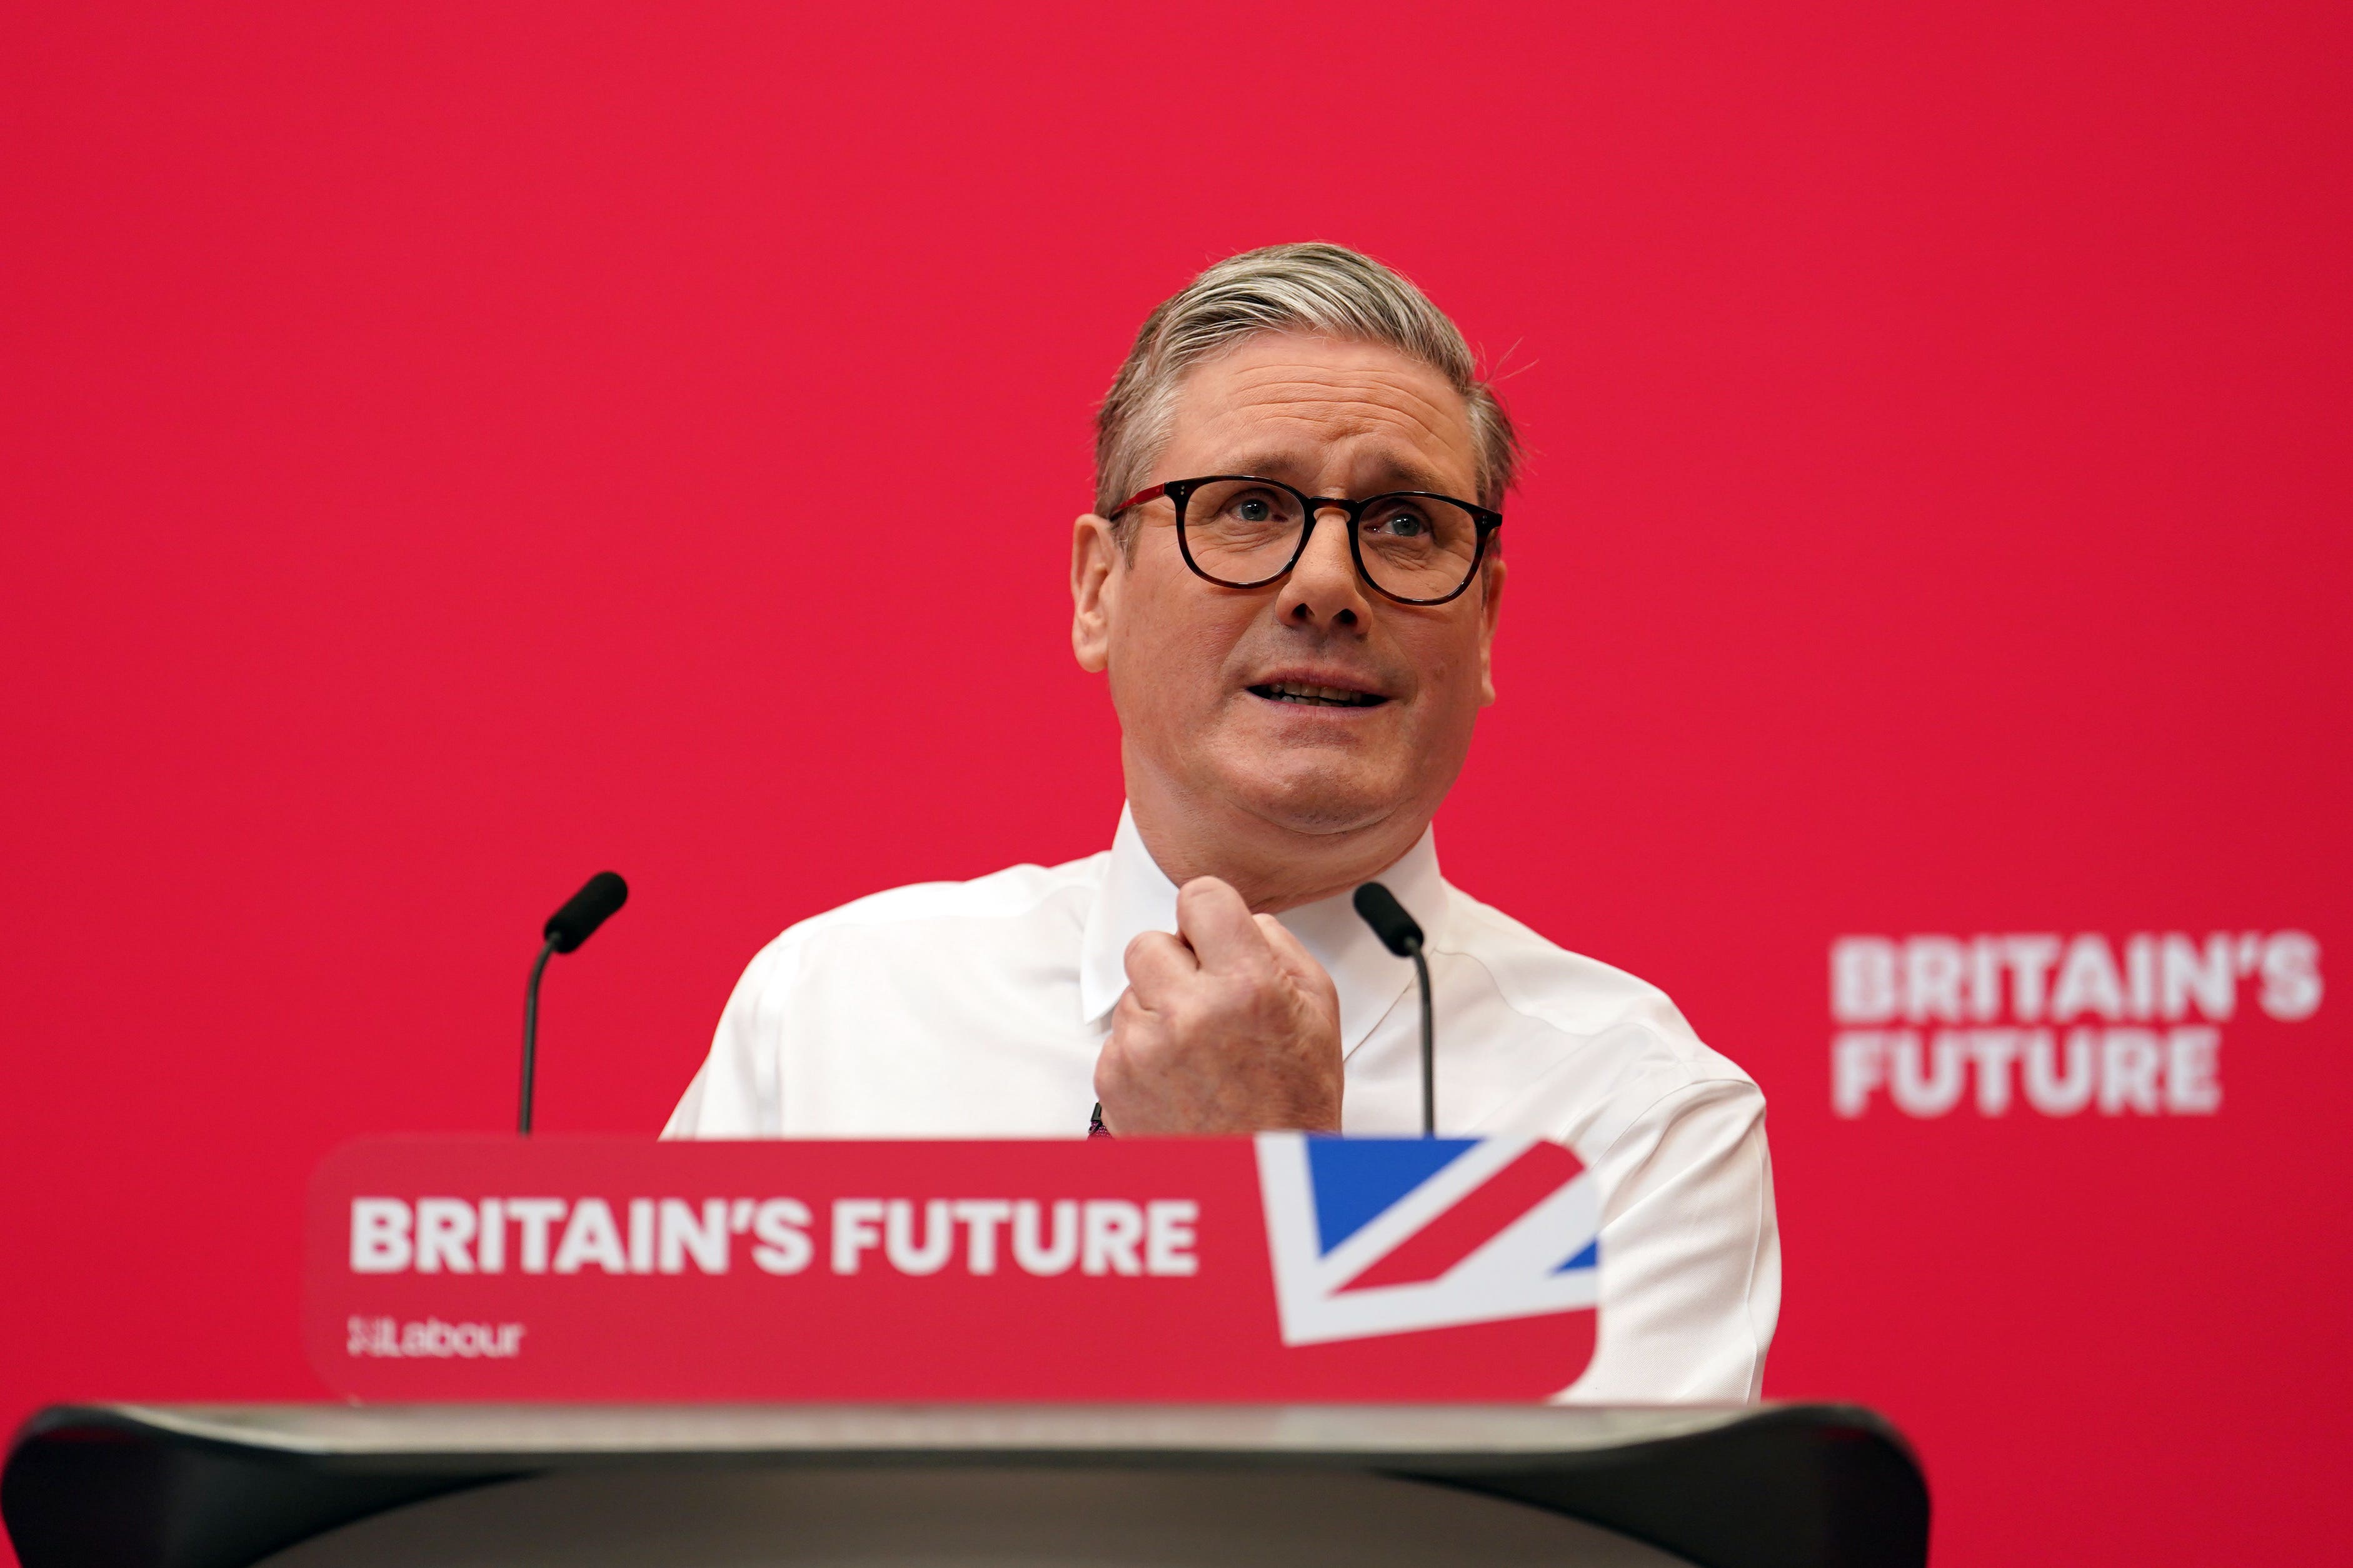 The Labour Party said it was focusing on winning the next general election